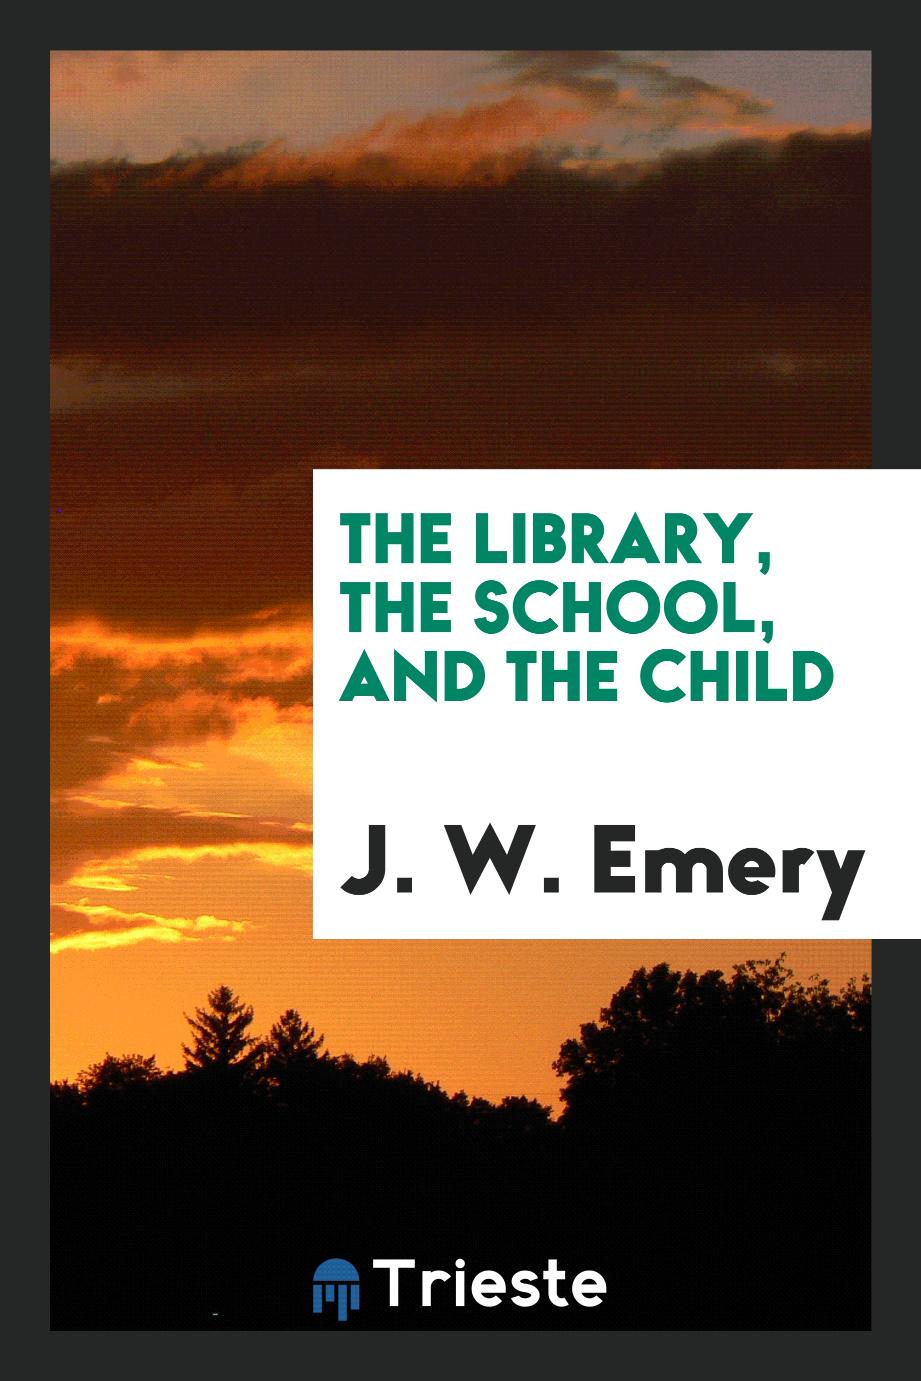 The Library, the School, and the Child